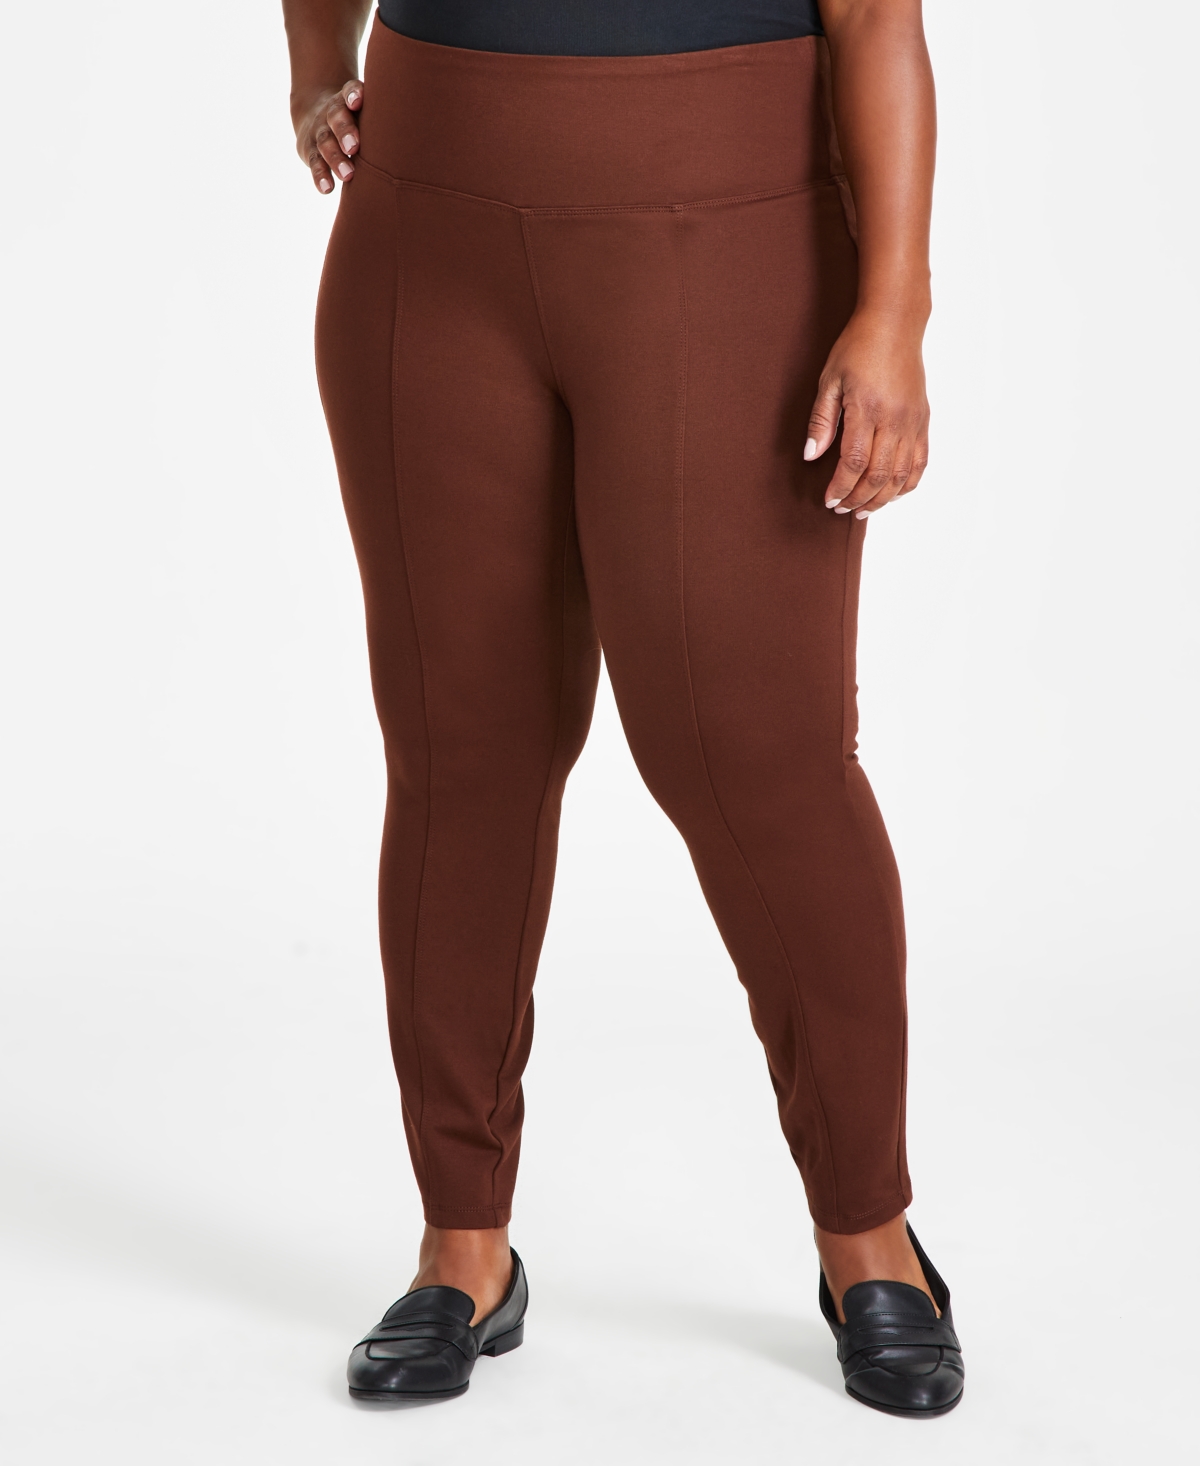 Style & Co Plus Size Pull-On Ponte Knit Pants, Created for Macy's